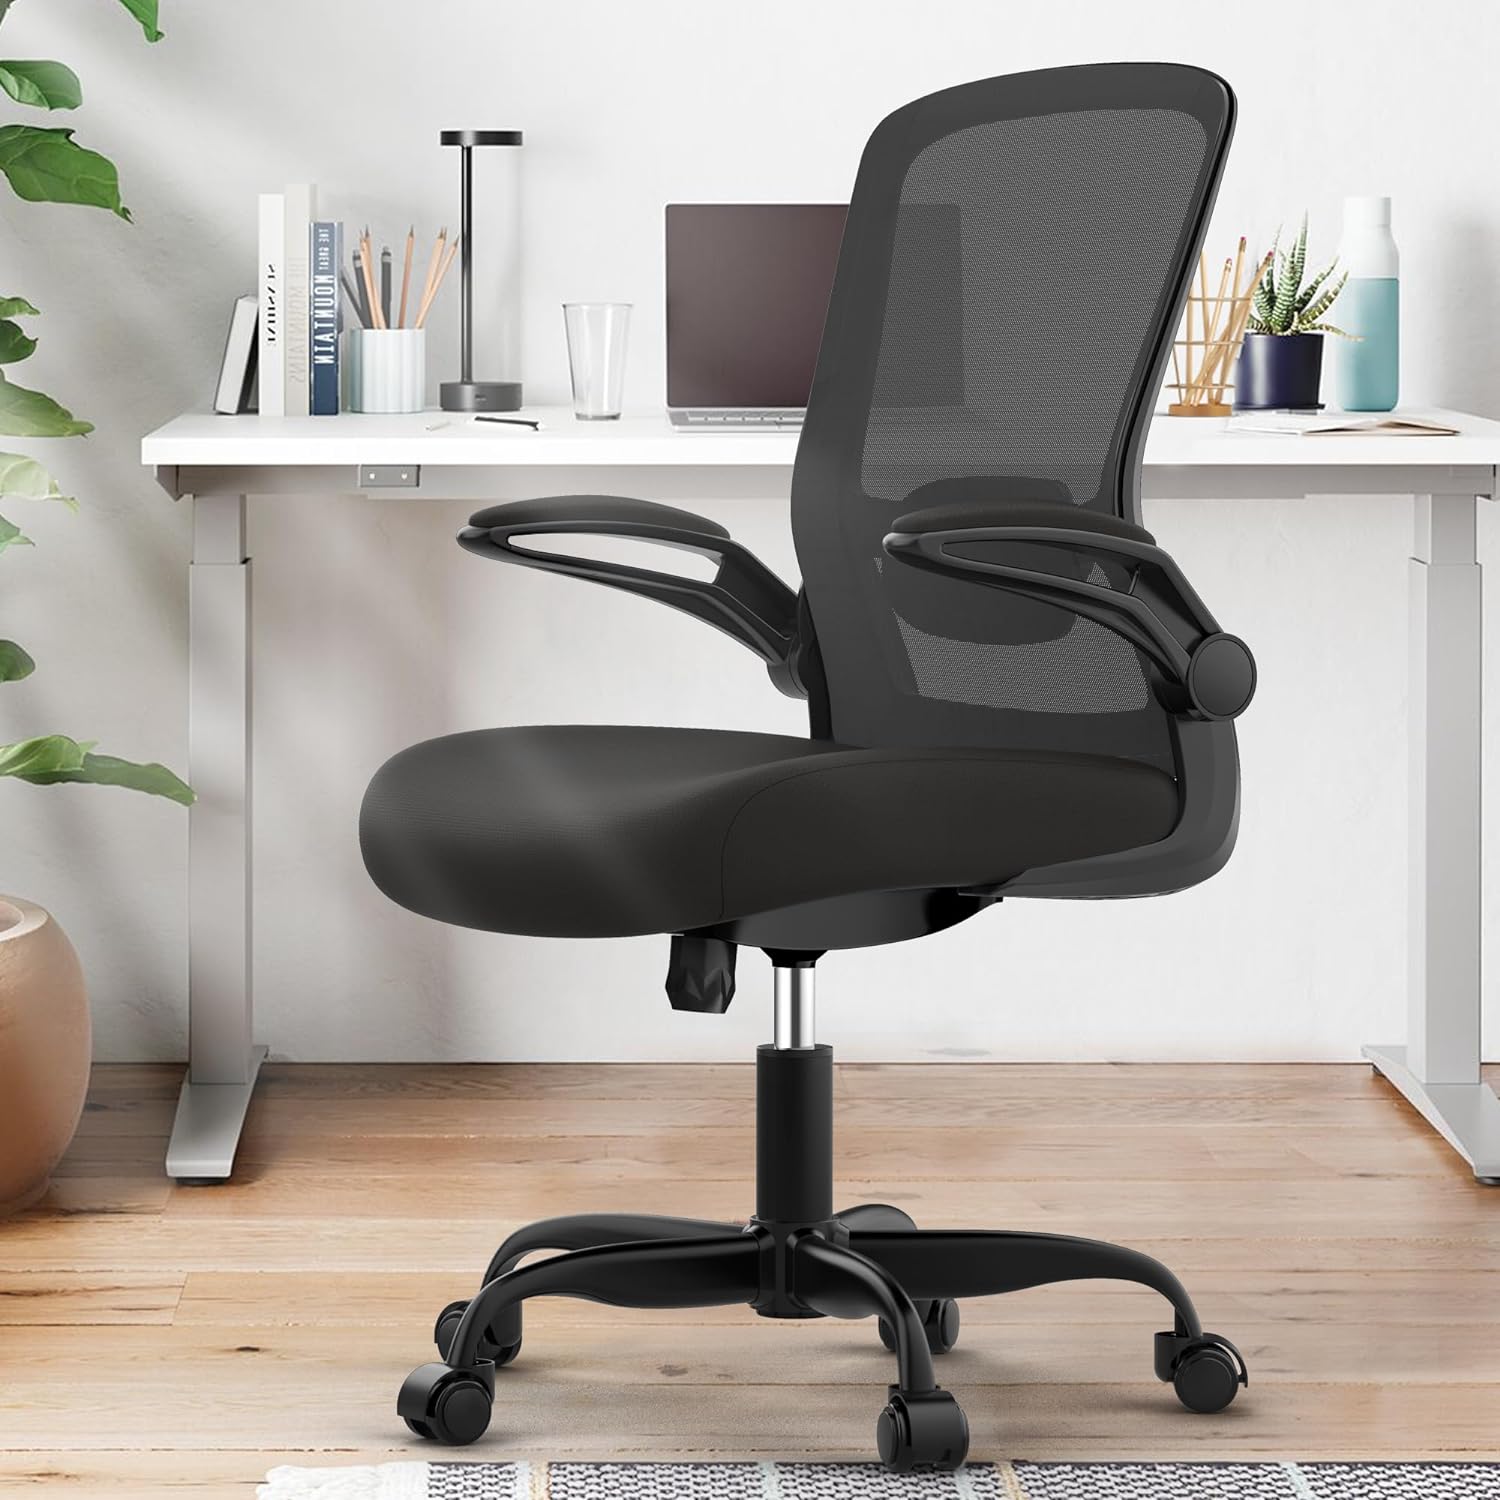 https://bigbigmart.com/wp-content/uploads/2023/12/Mimoglad-Office-Chair-Ergonomic-Desk-Chair-with-Adjustable-Lumbar-Support-High-Back-Mesh-Computer-Chair-with-Flip-up-Armrests-BIFMA-Passed-Task-Chairs-Executive-Chair-for-Home-Office-All-Black8.jpg